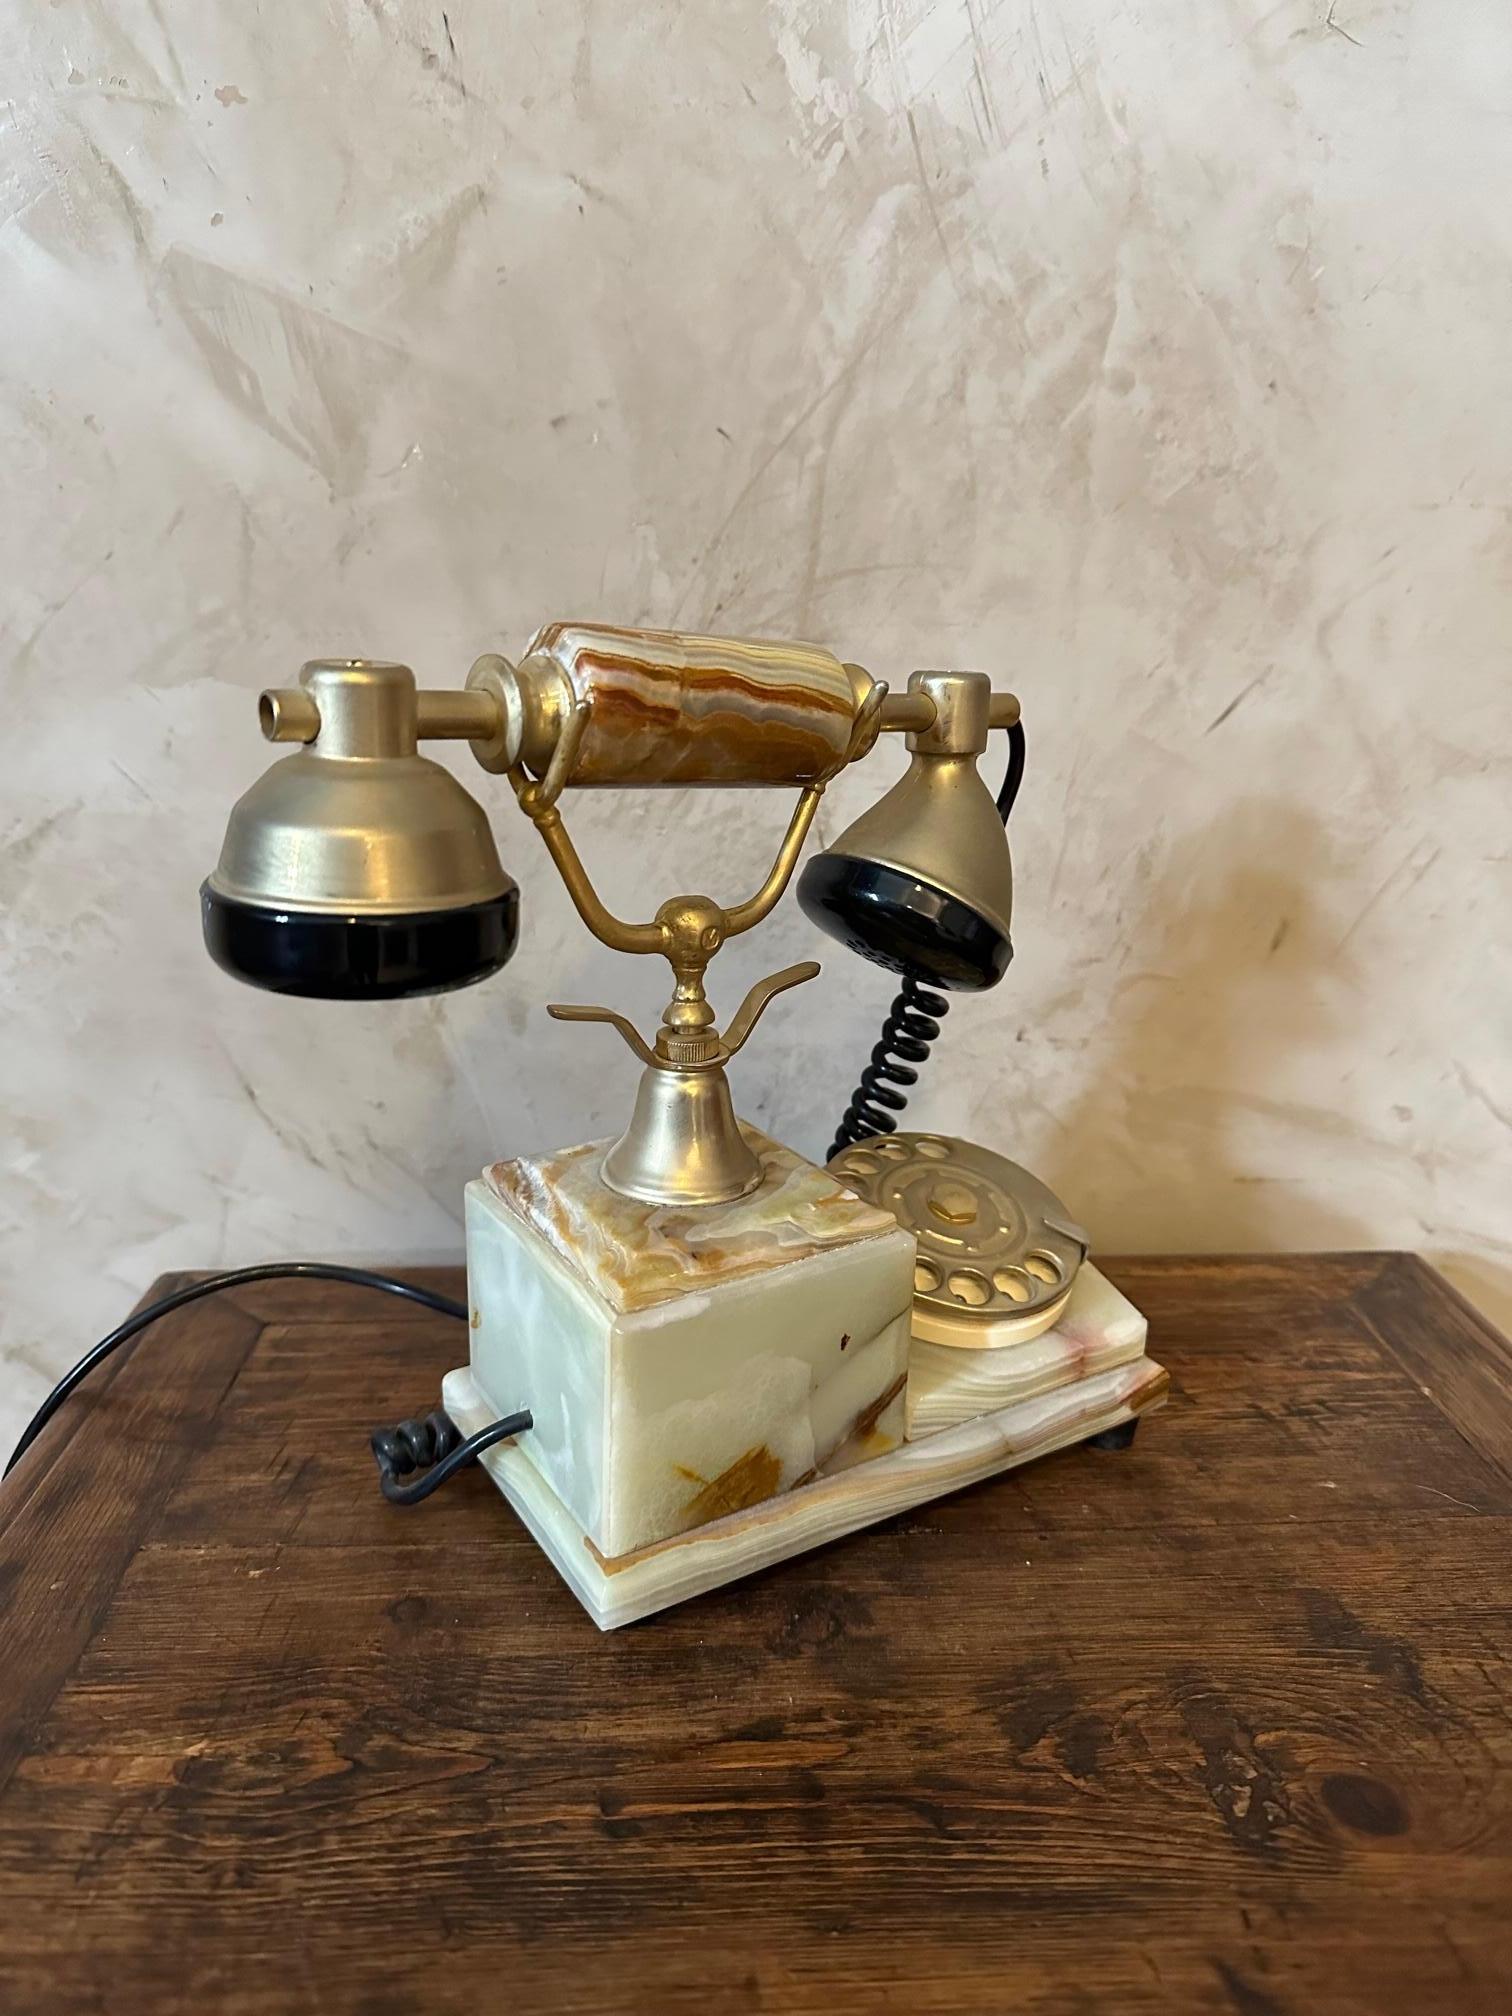 20th century marble phone made in Italy in the 60s. 
Green marble and brass. Still working. Very good state. Retro style.